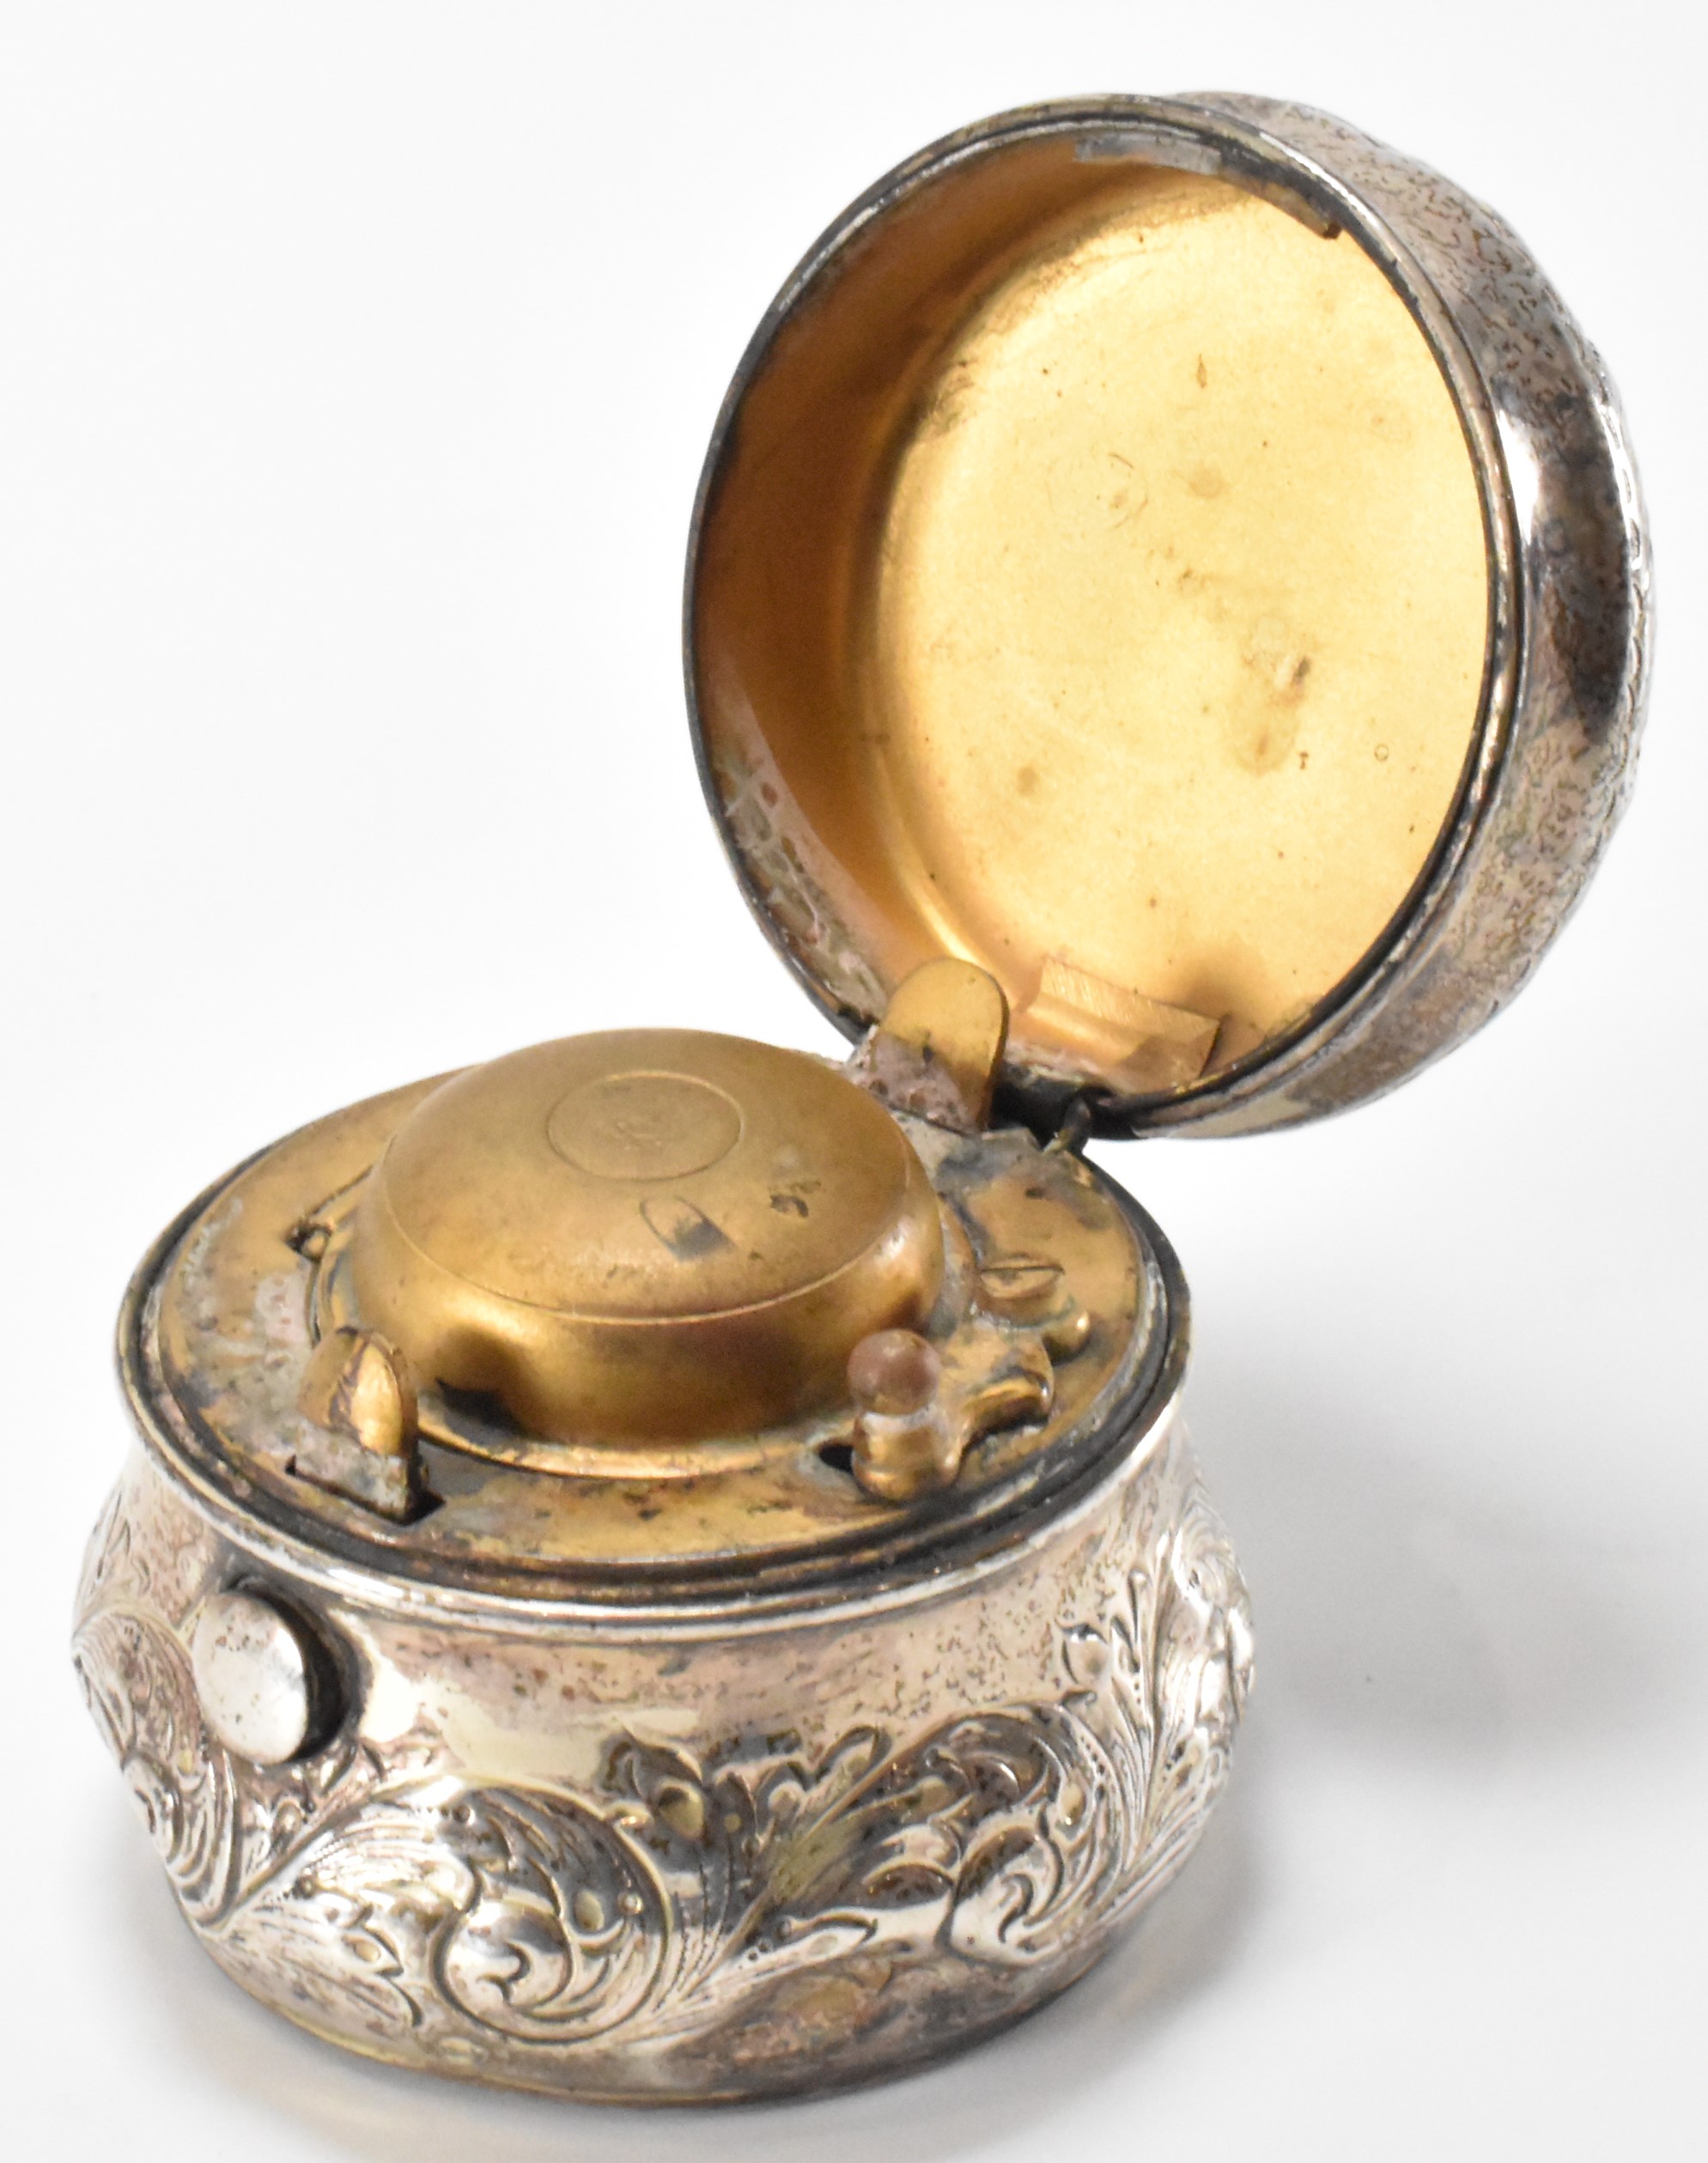 EDWARDIAN SILVER CASED INKWELL - Image 5 of 6